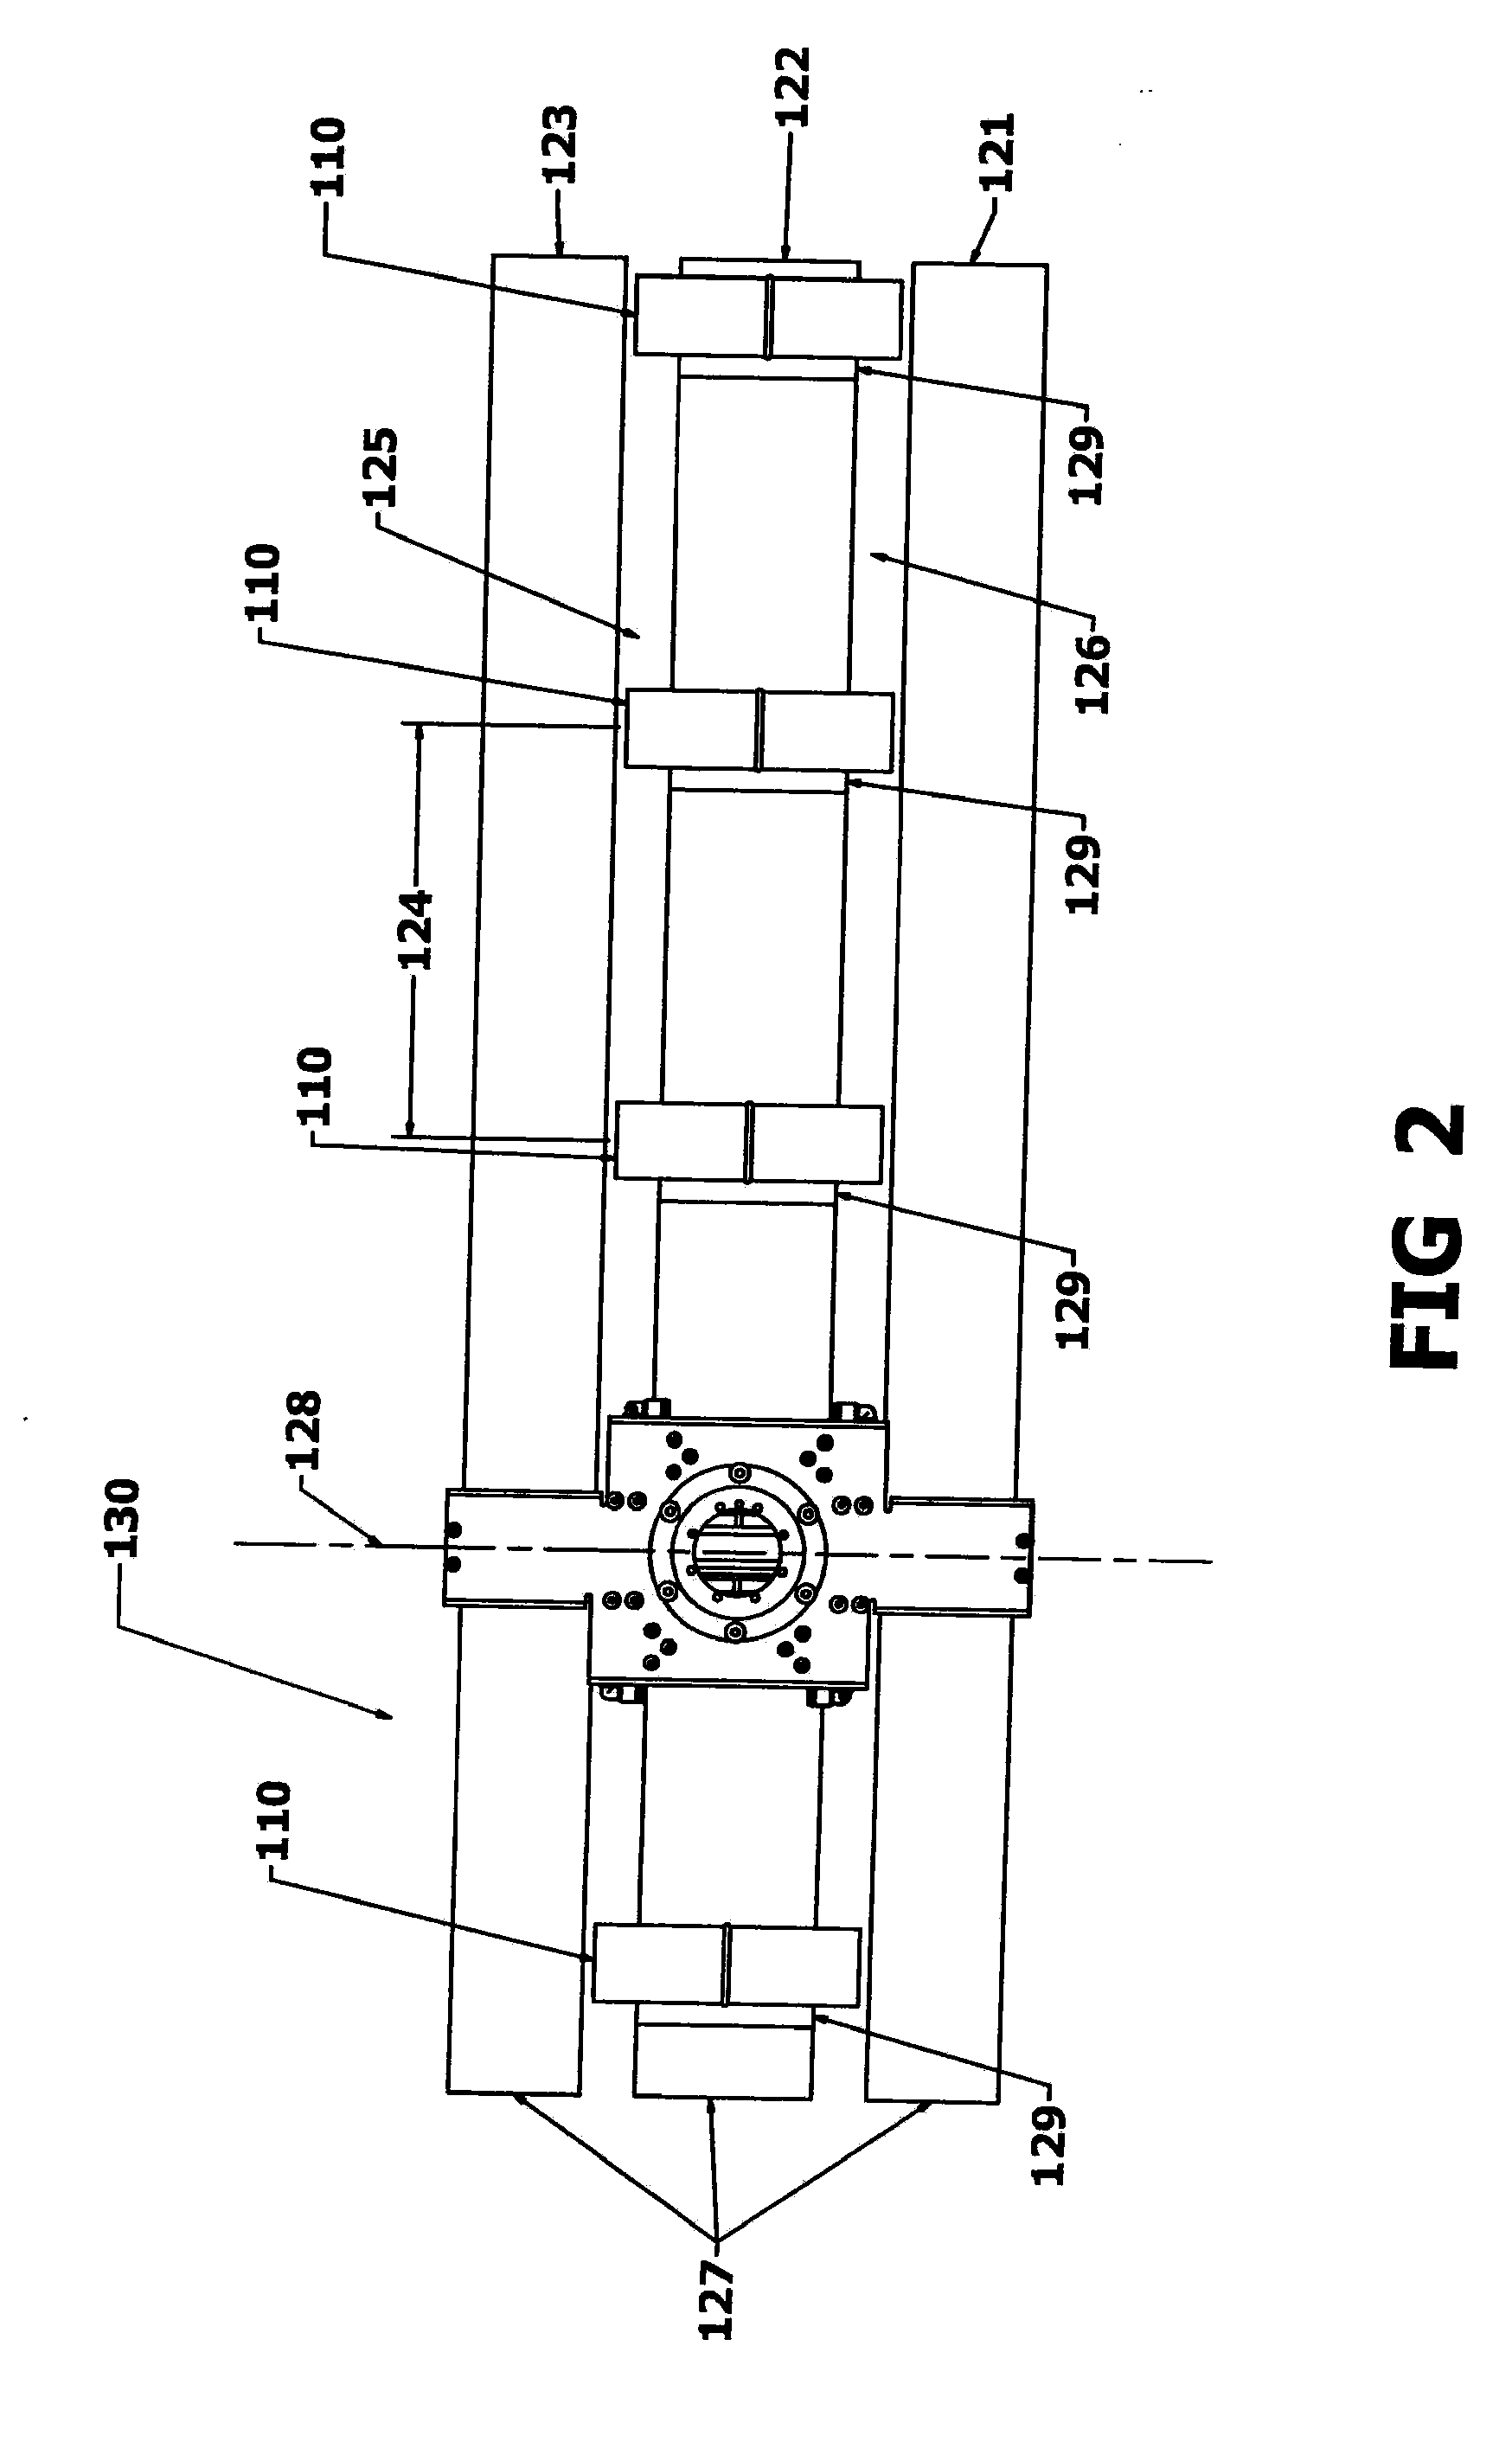 Method and apparatus for debanding a compressible bundle